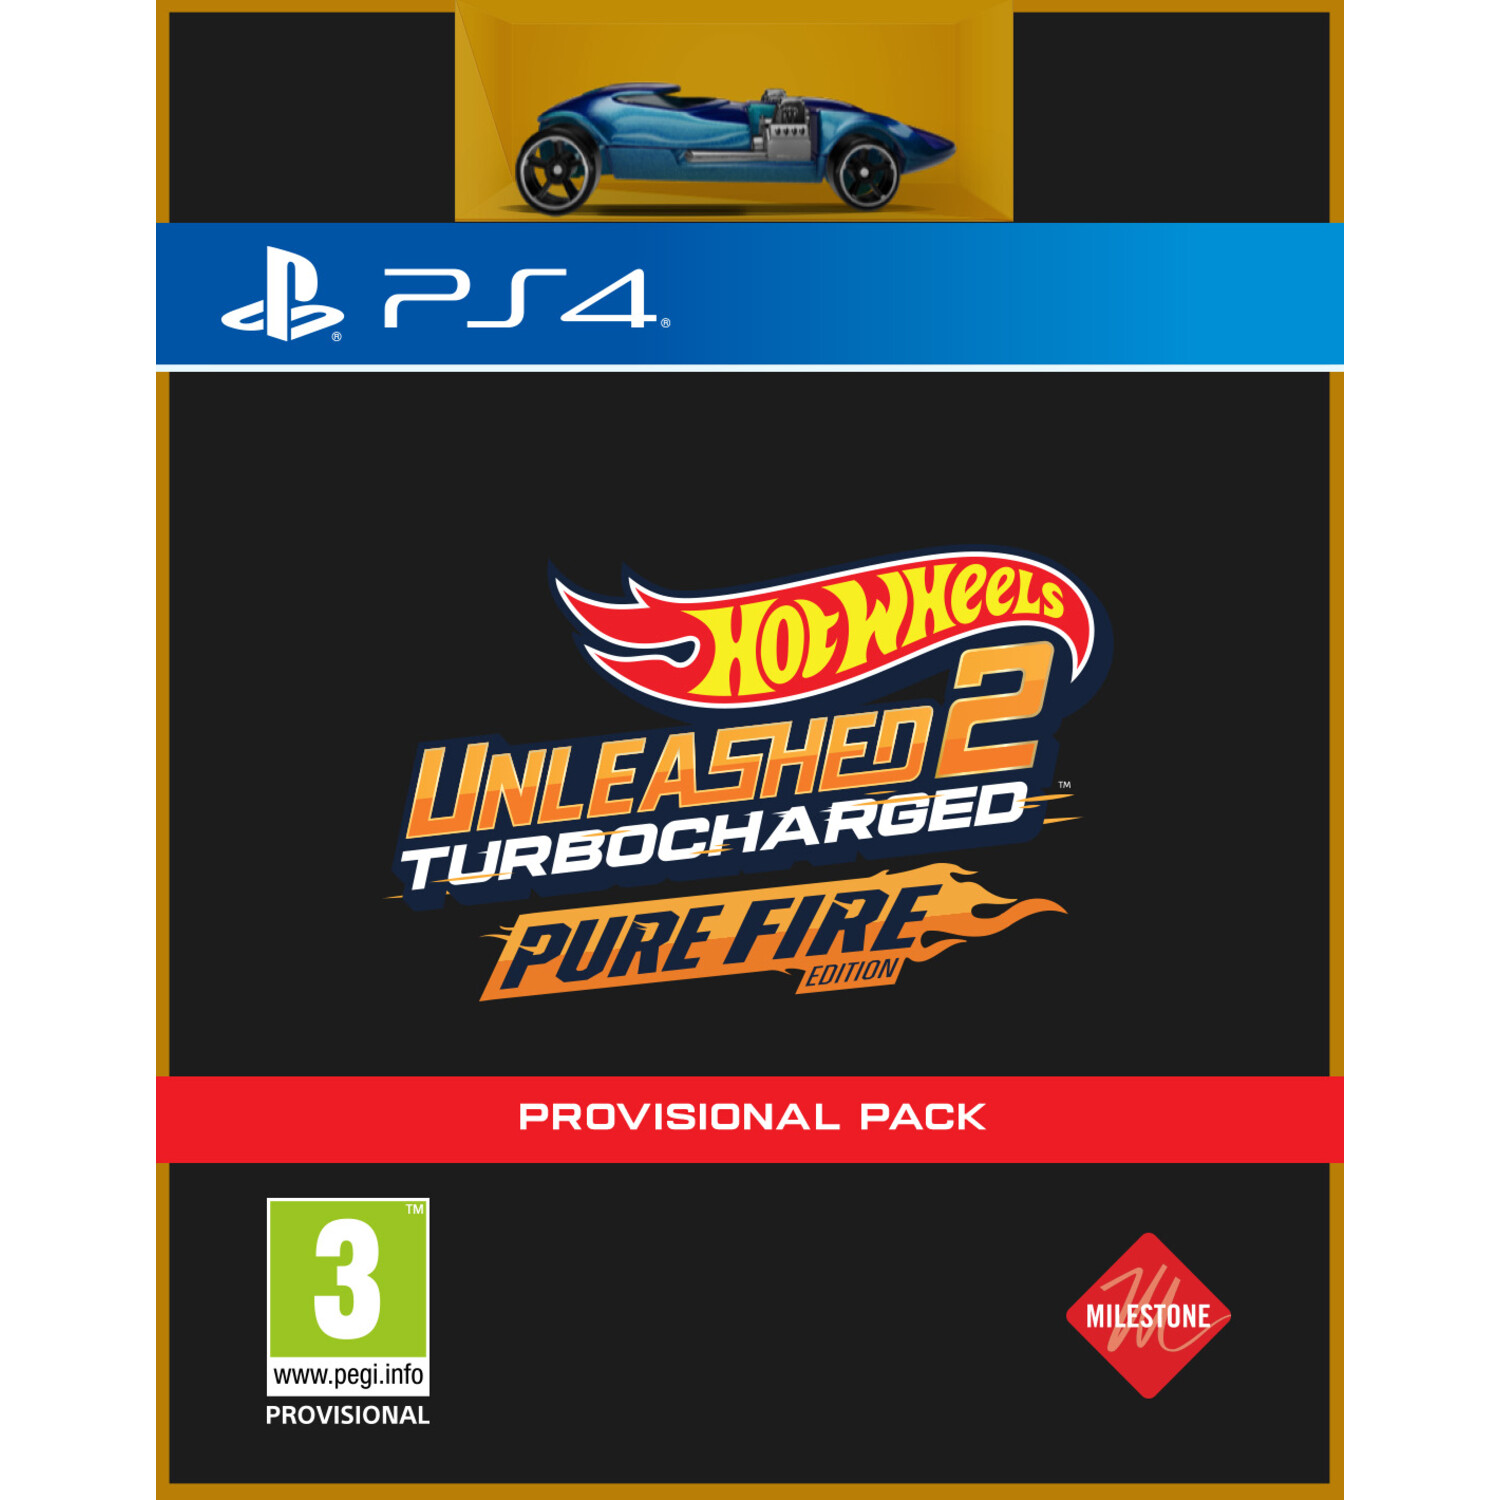 PS4 Hot Wheels 2: Unleashed - Turbocharged Pure Fire Edition